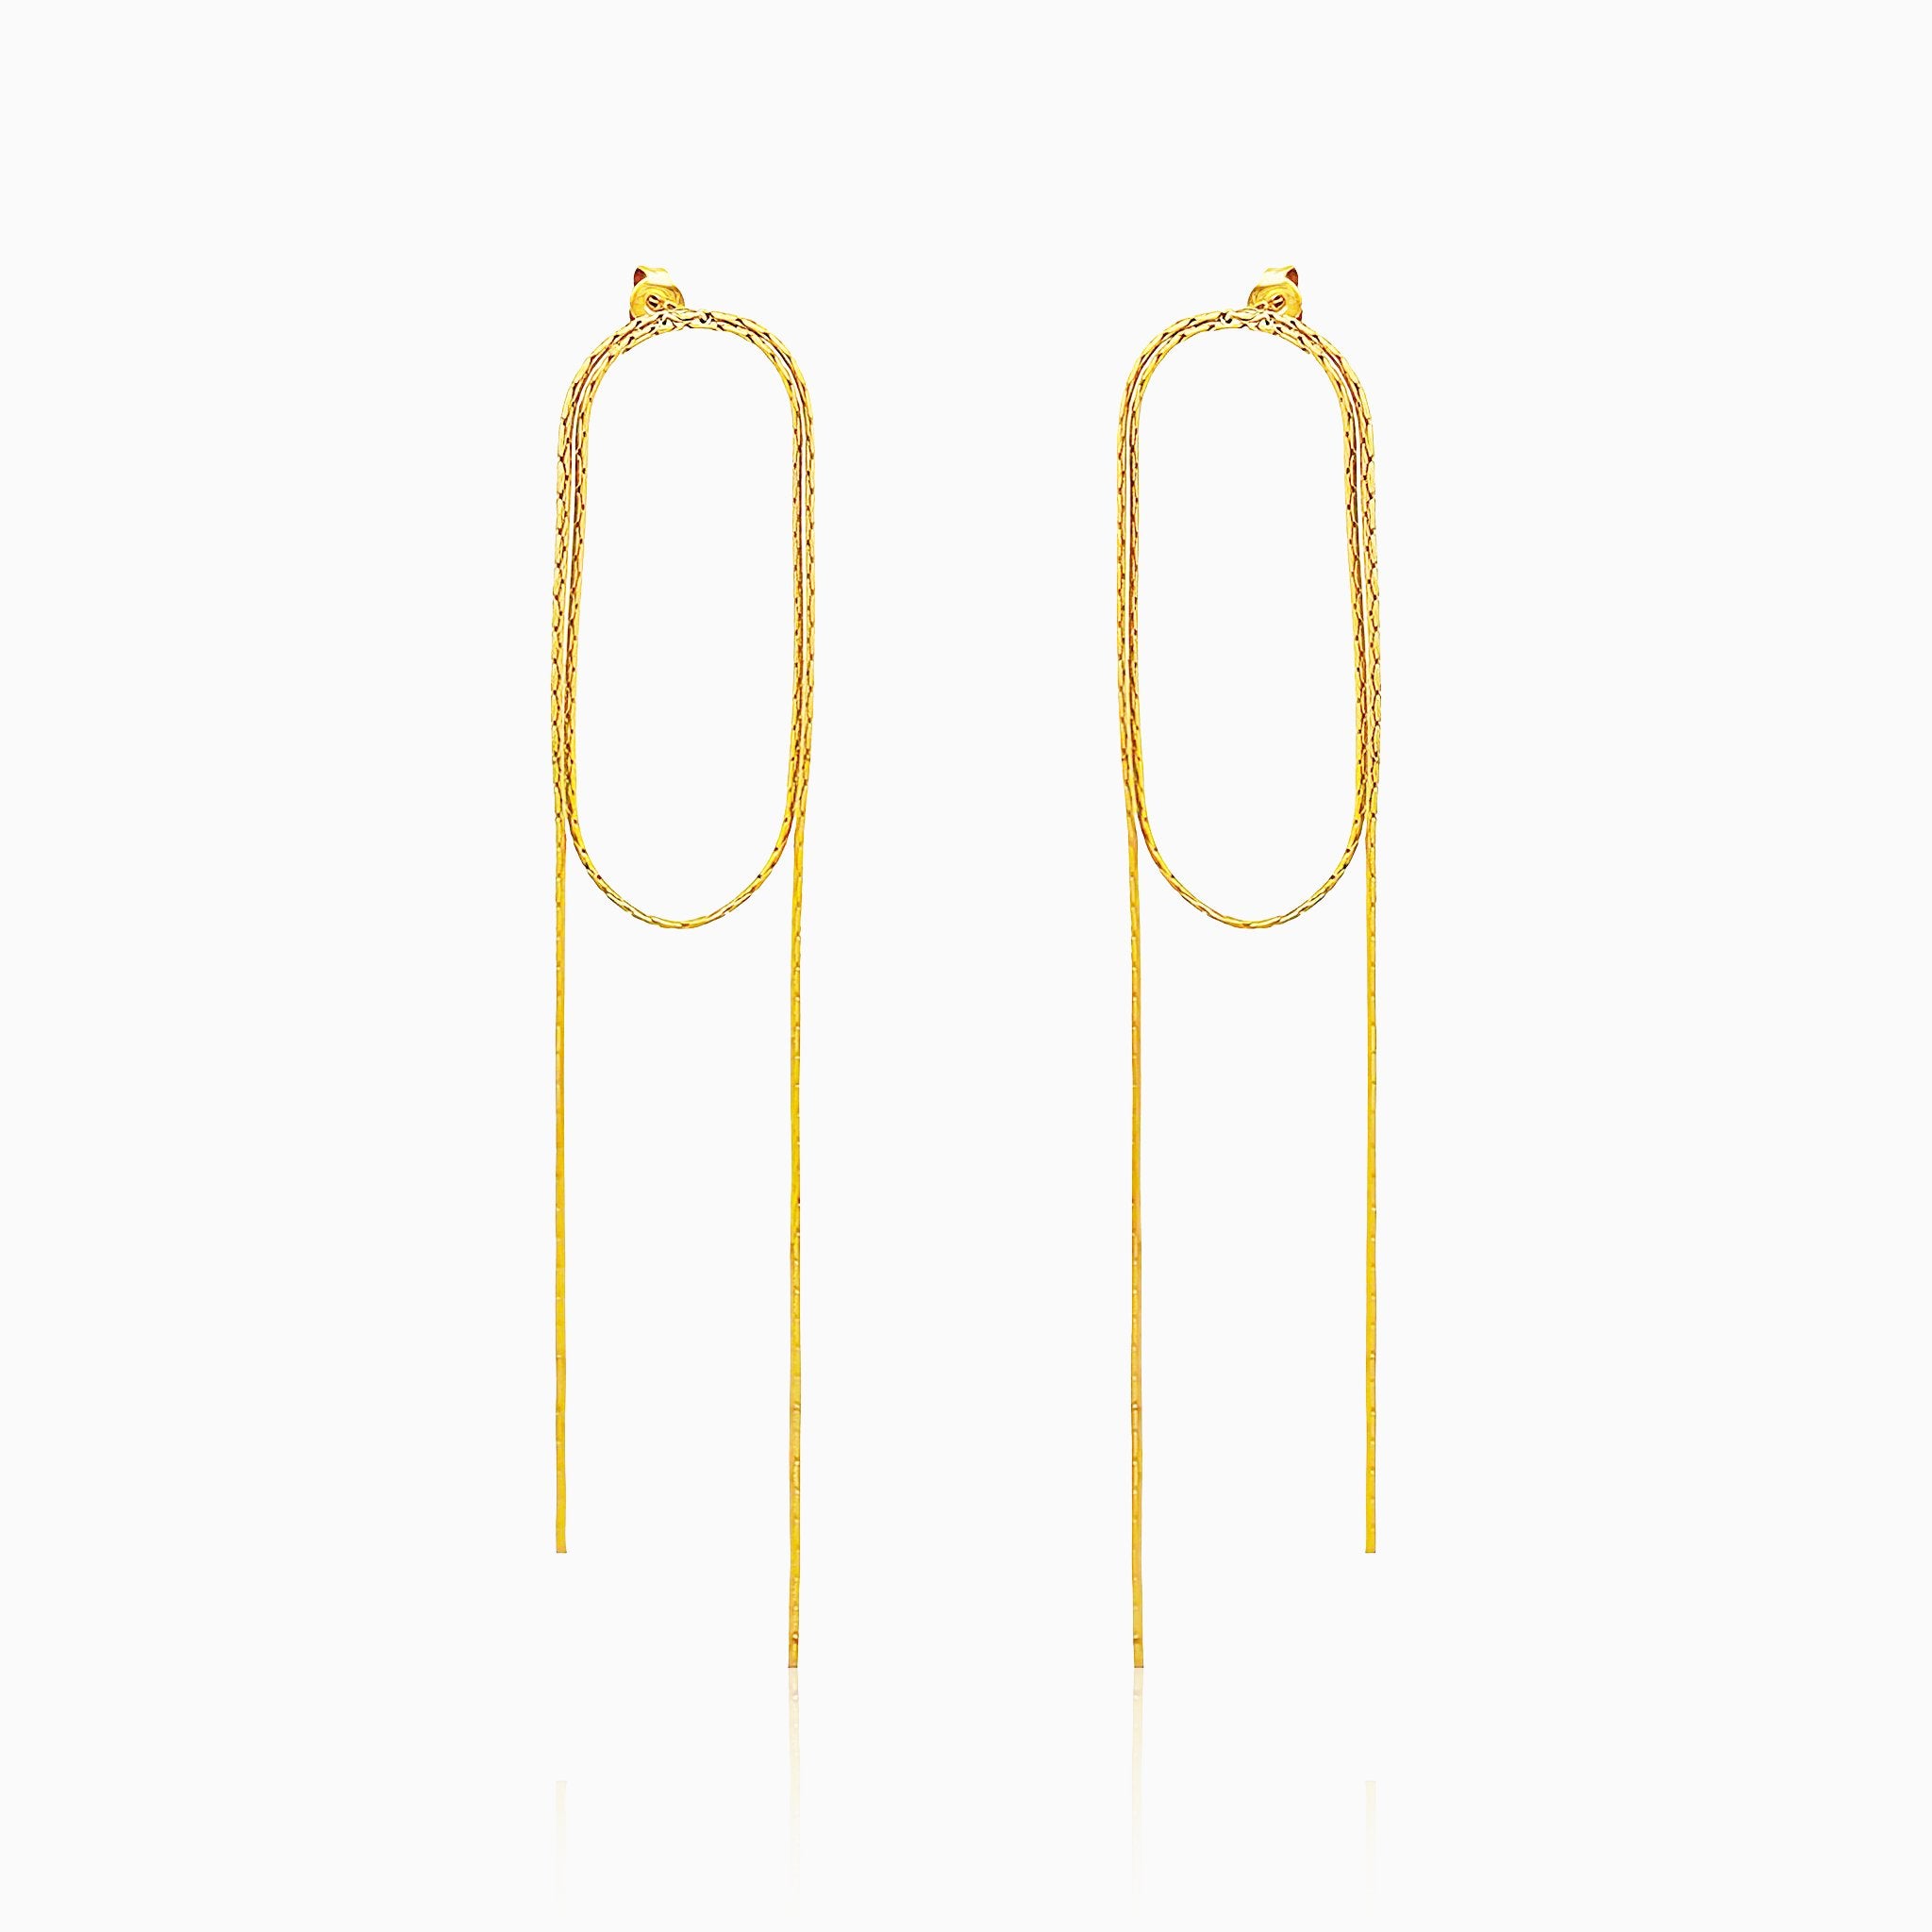 Long Chain Tassel Earrings - Nobbier - Earring - 18K Gold And Titanium PVD Coated Jewelry